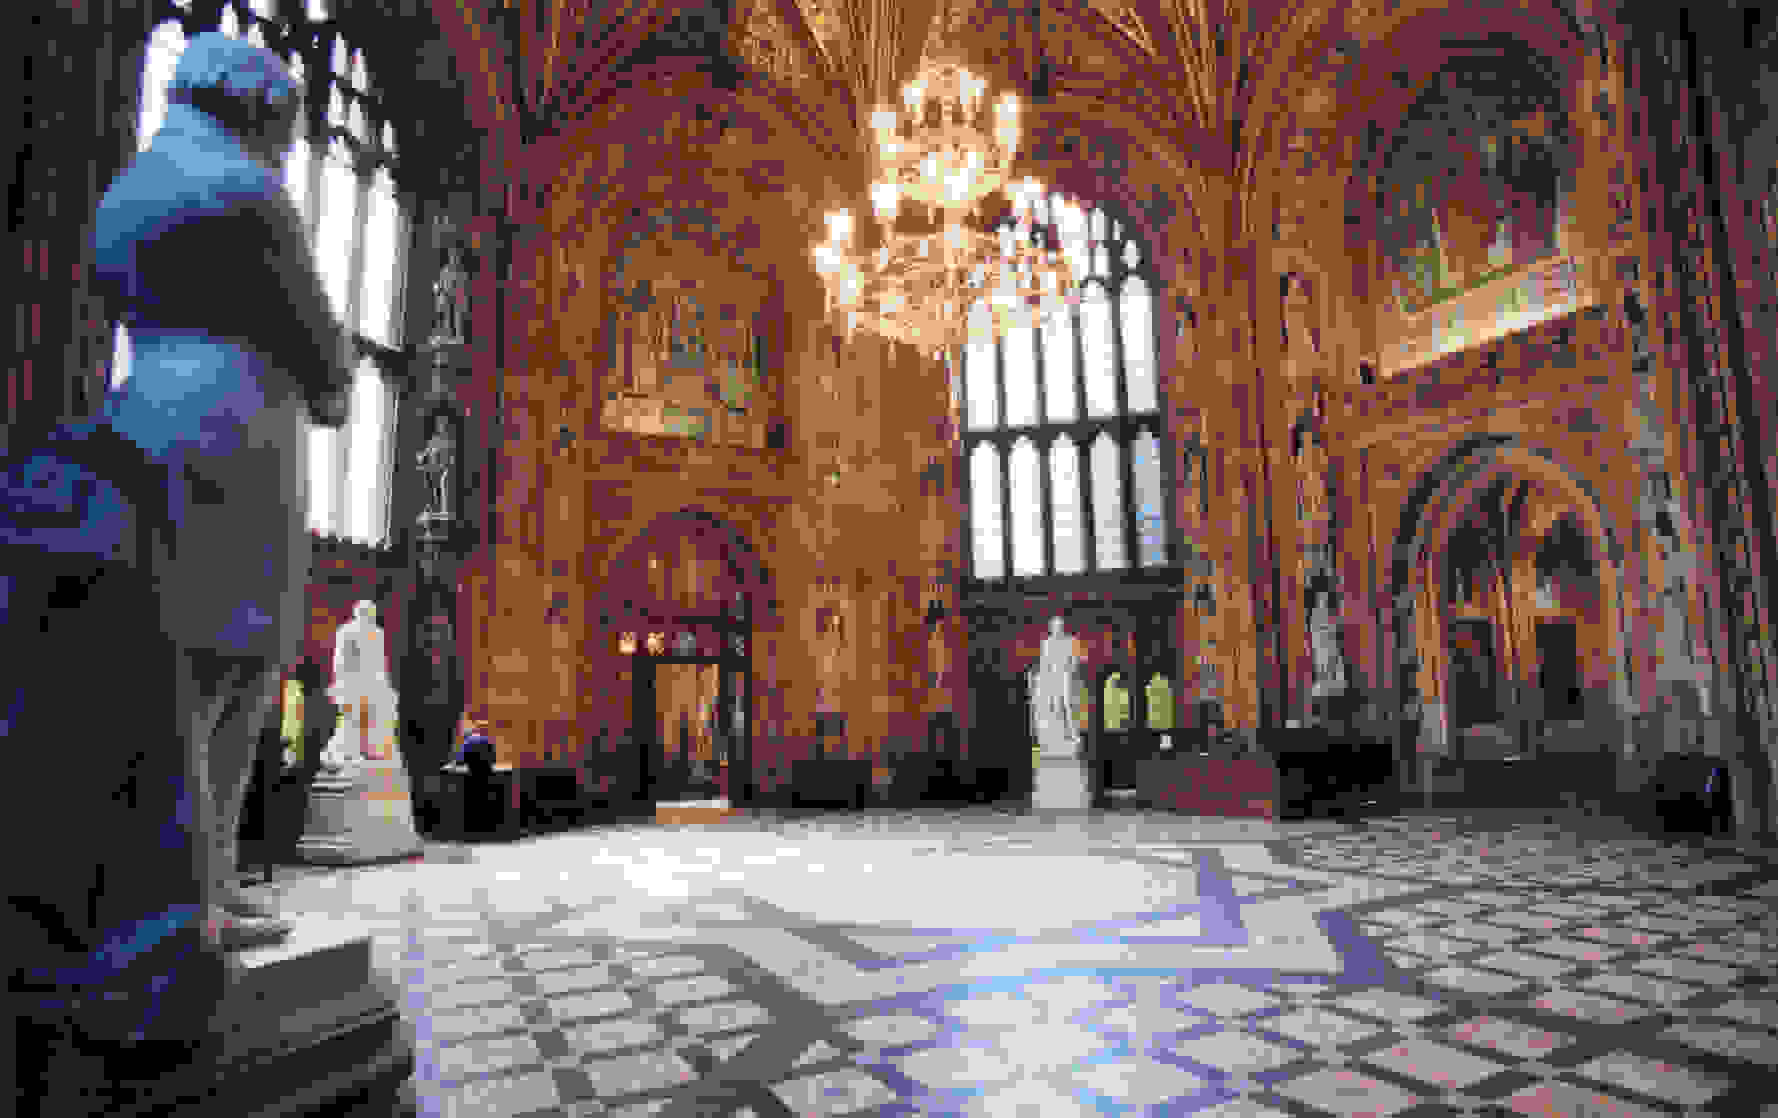 Central Lobby, Palace of Westminster. ©UK Parliament (CC BY-NC-ND 2.0 Deed)